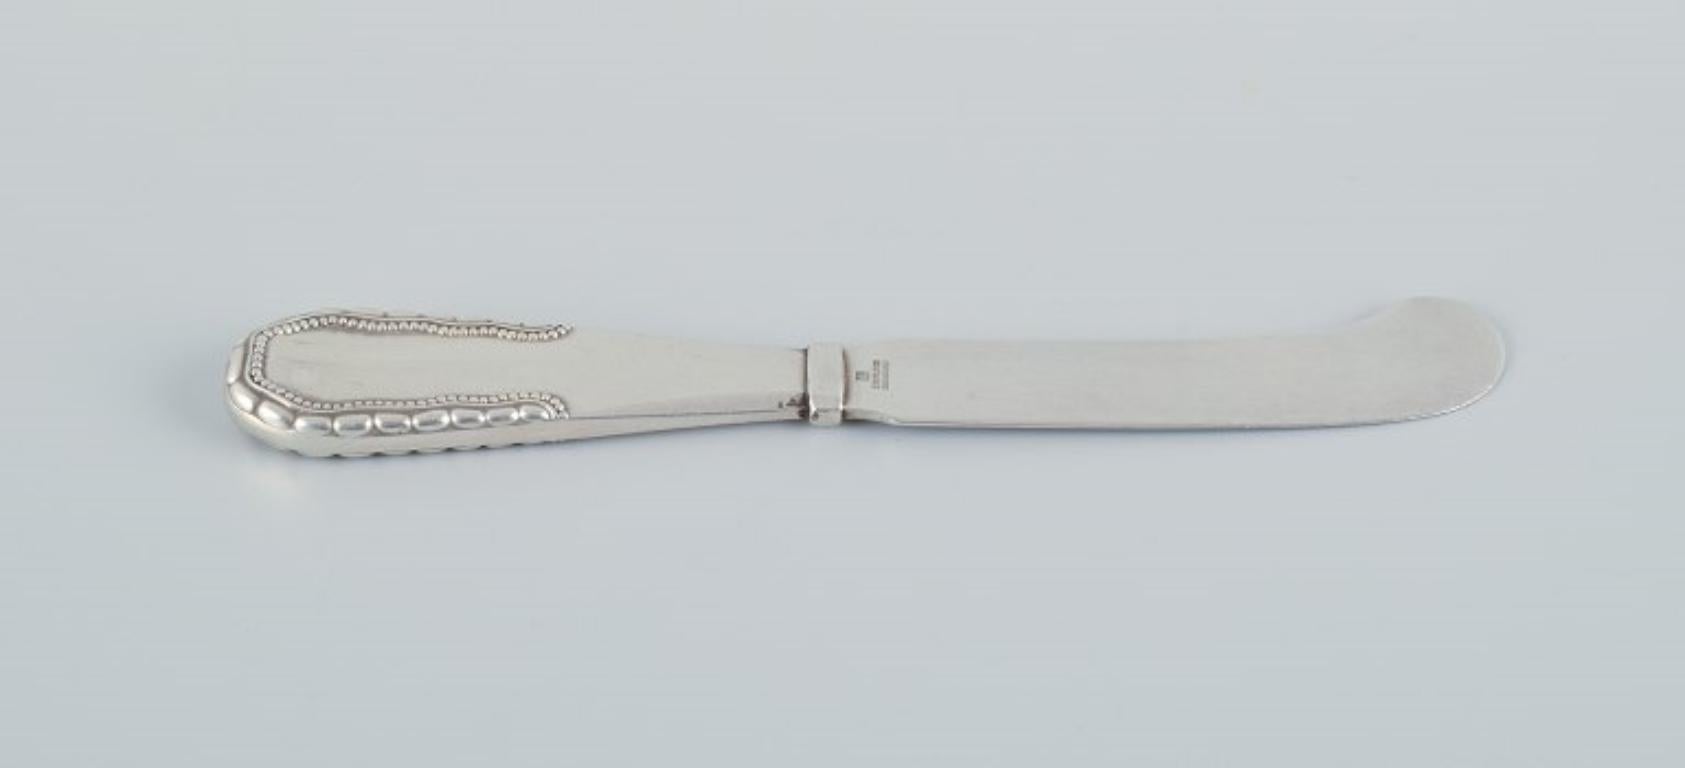 Georg Jensen, Viking, butter knife in sterling silver. All silver.
Stamped with 1933-1944 hallmark.
In excellent condition.
Dimensions: L 15.1 cm.